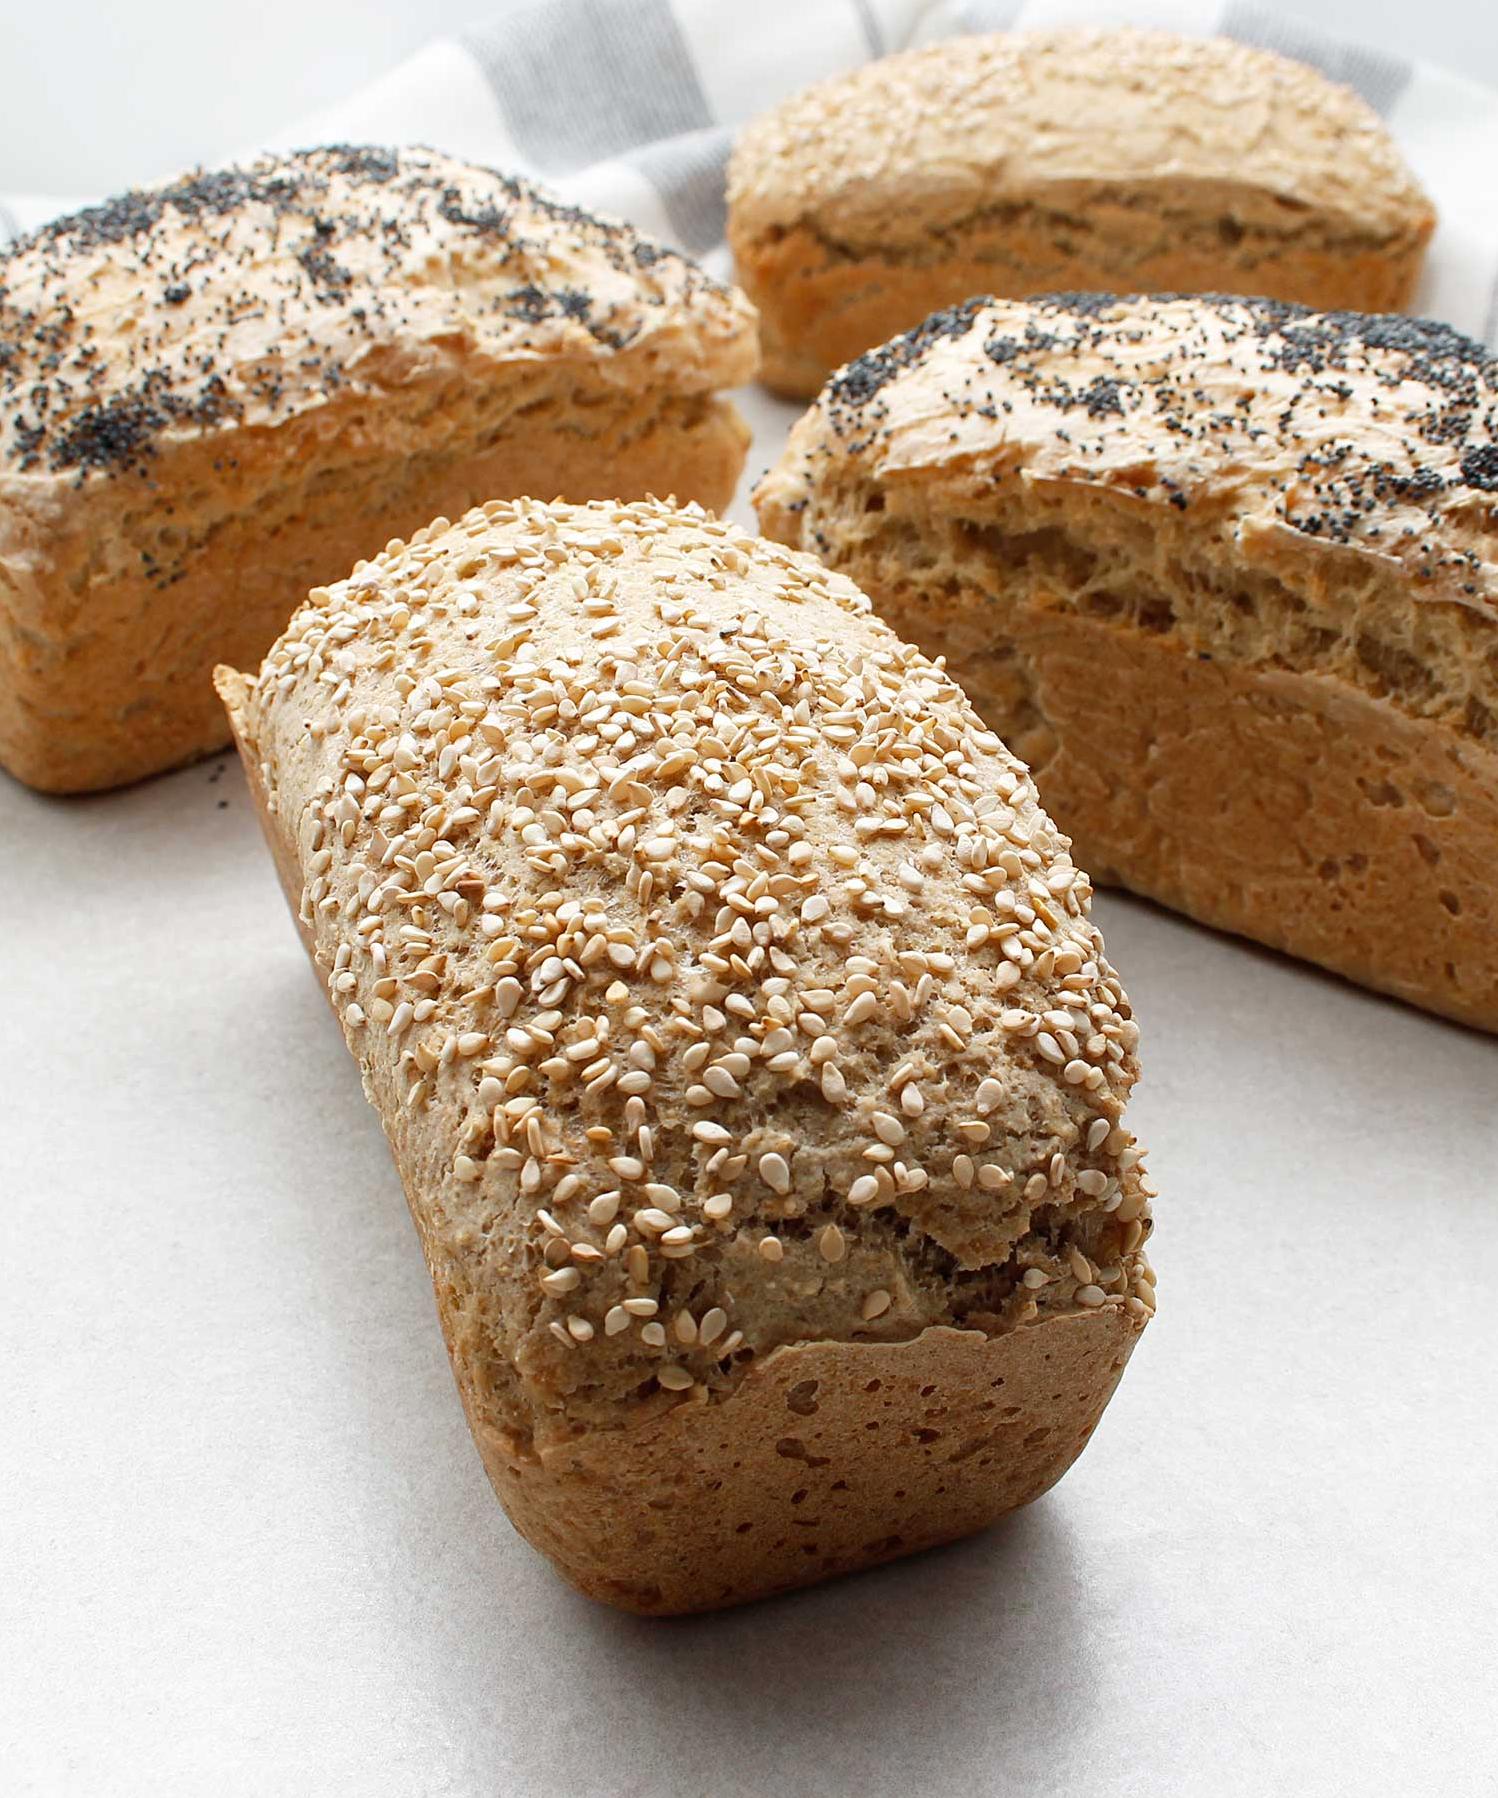  Bread that won't complicate your dietary needs